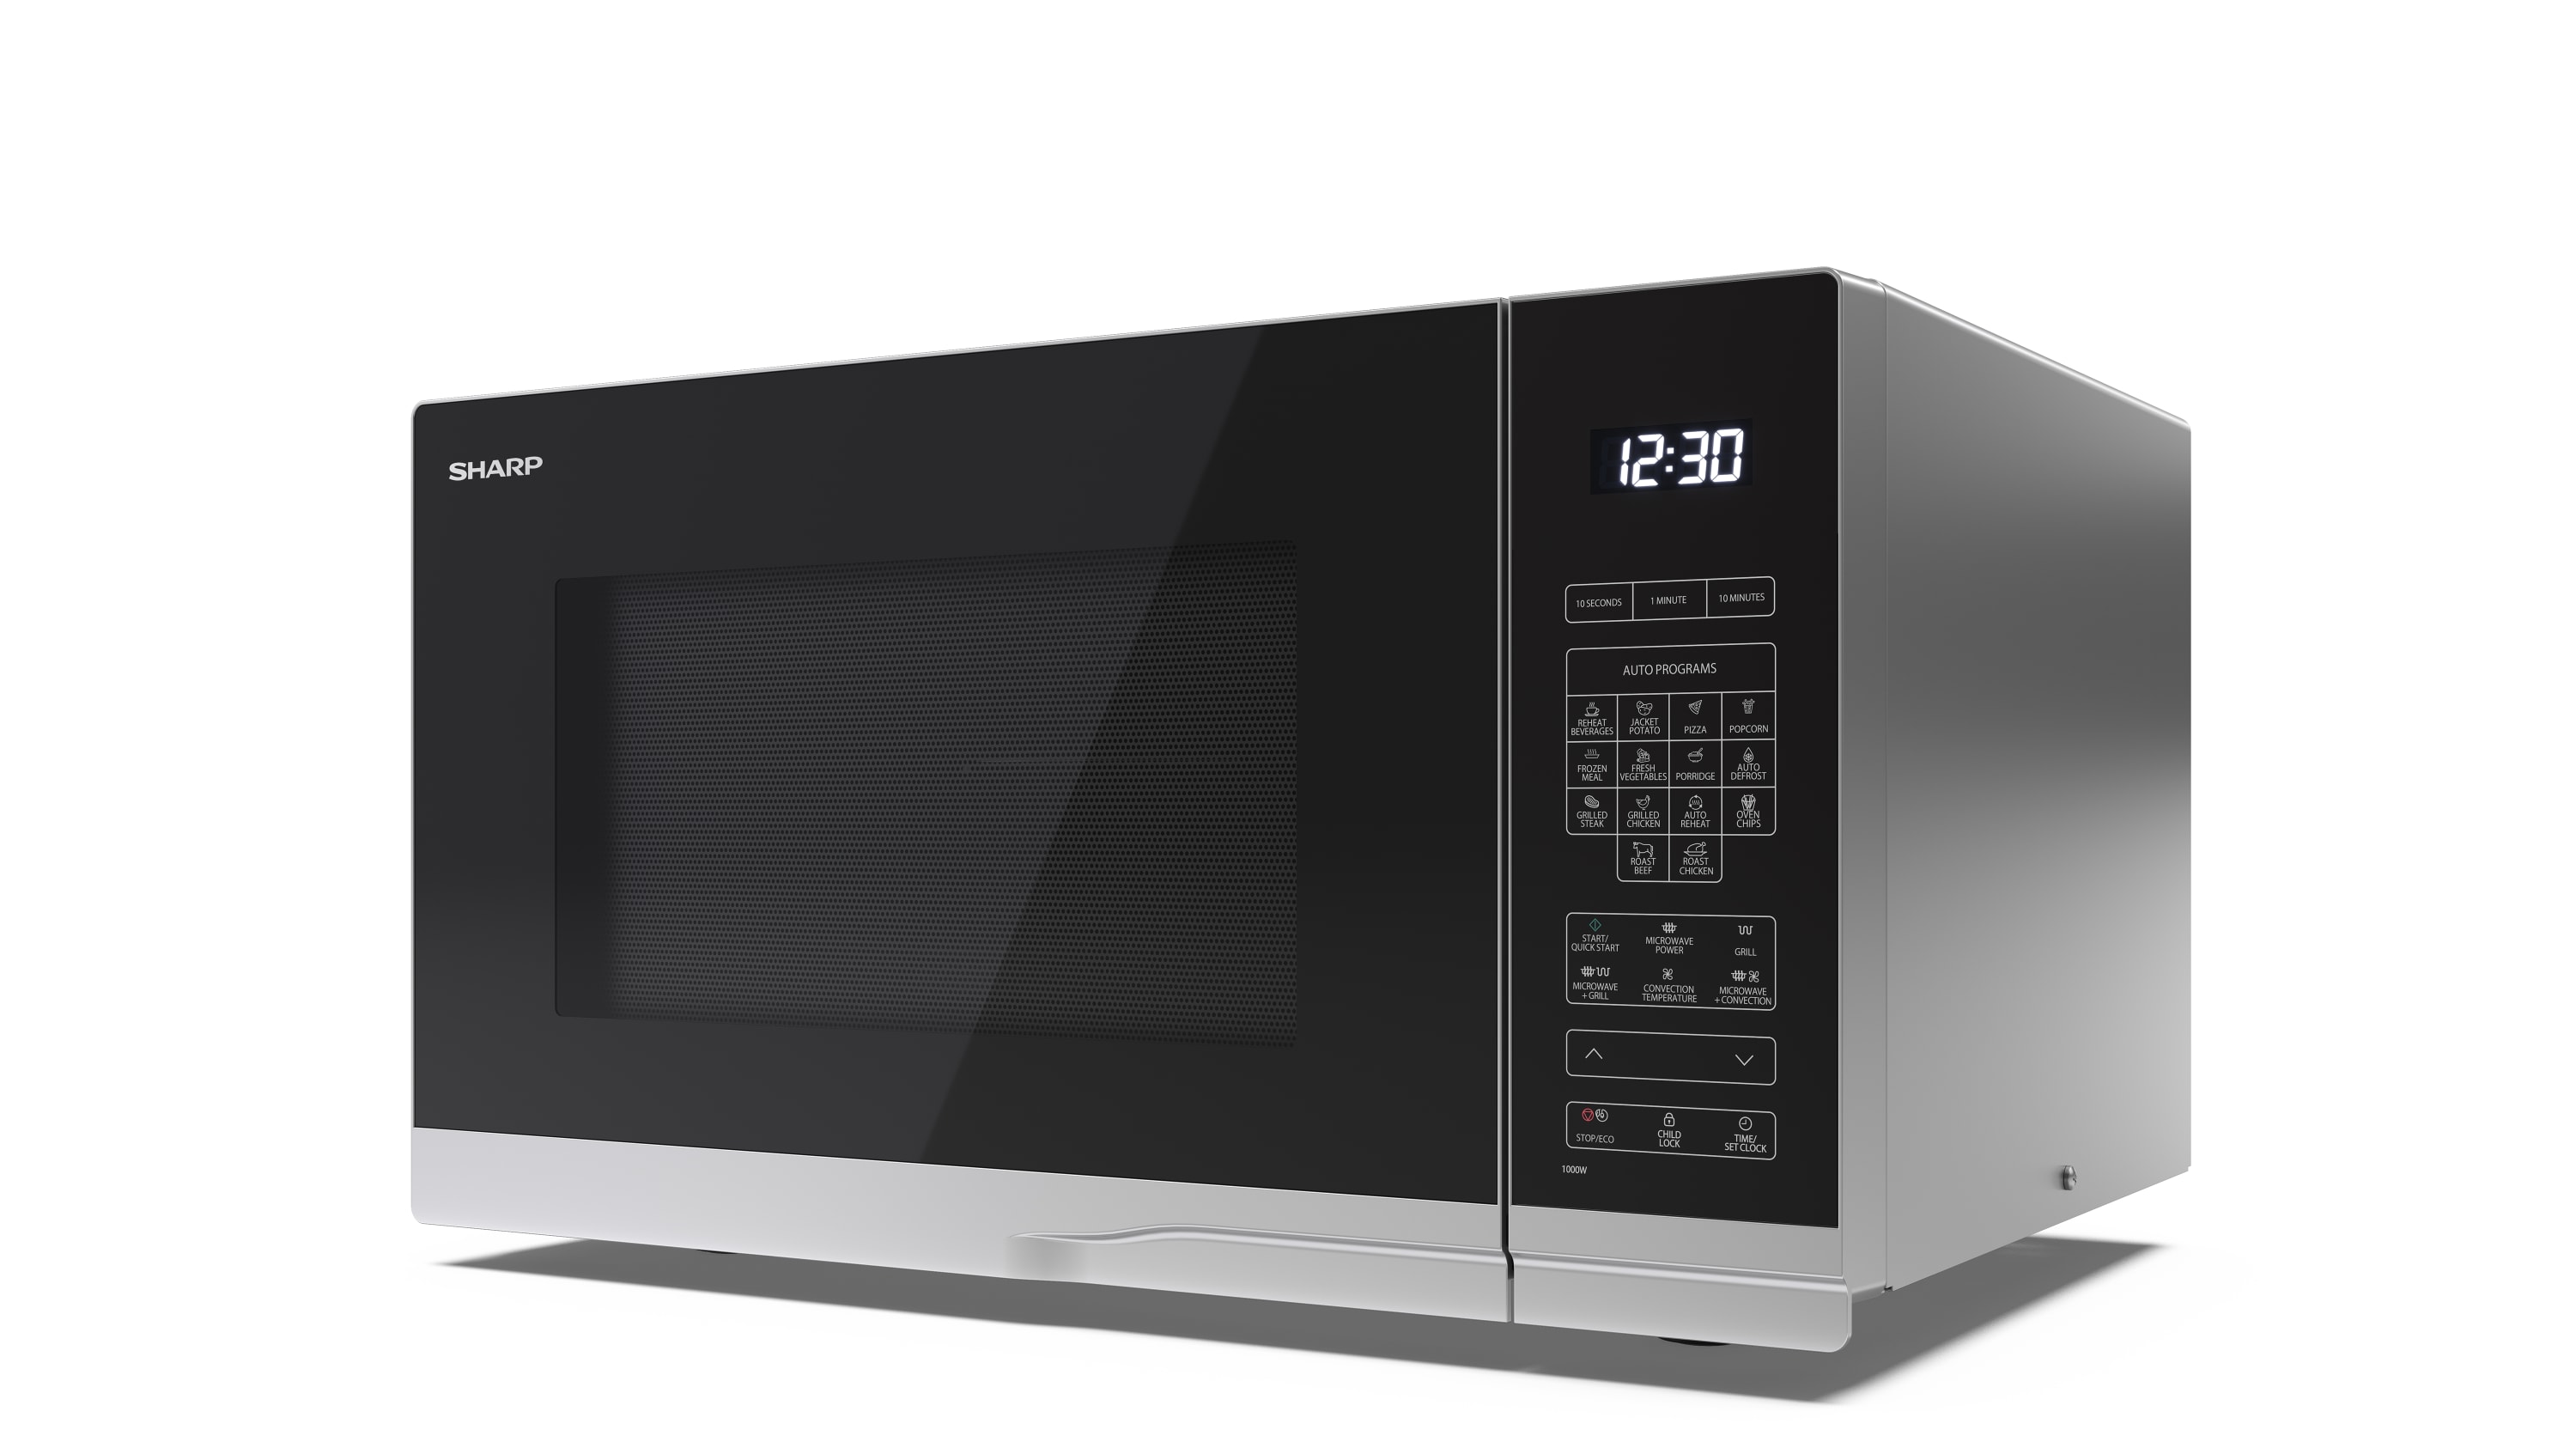 32 Litre Microwave Oven with Grill and Convection - YC-PC322AE-S